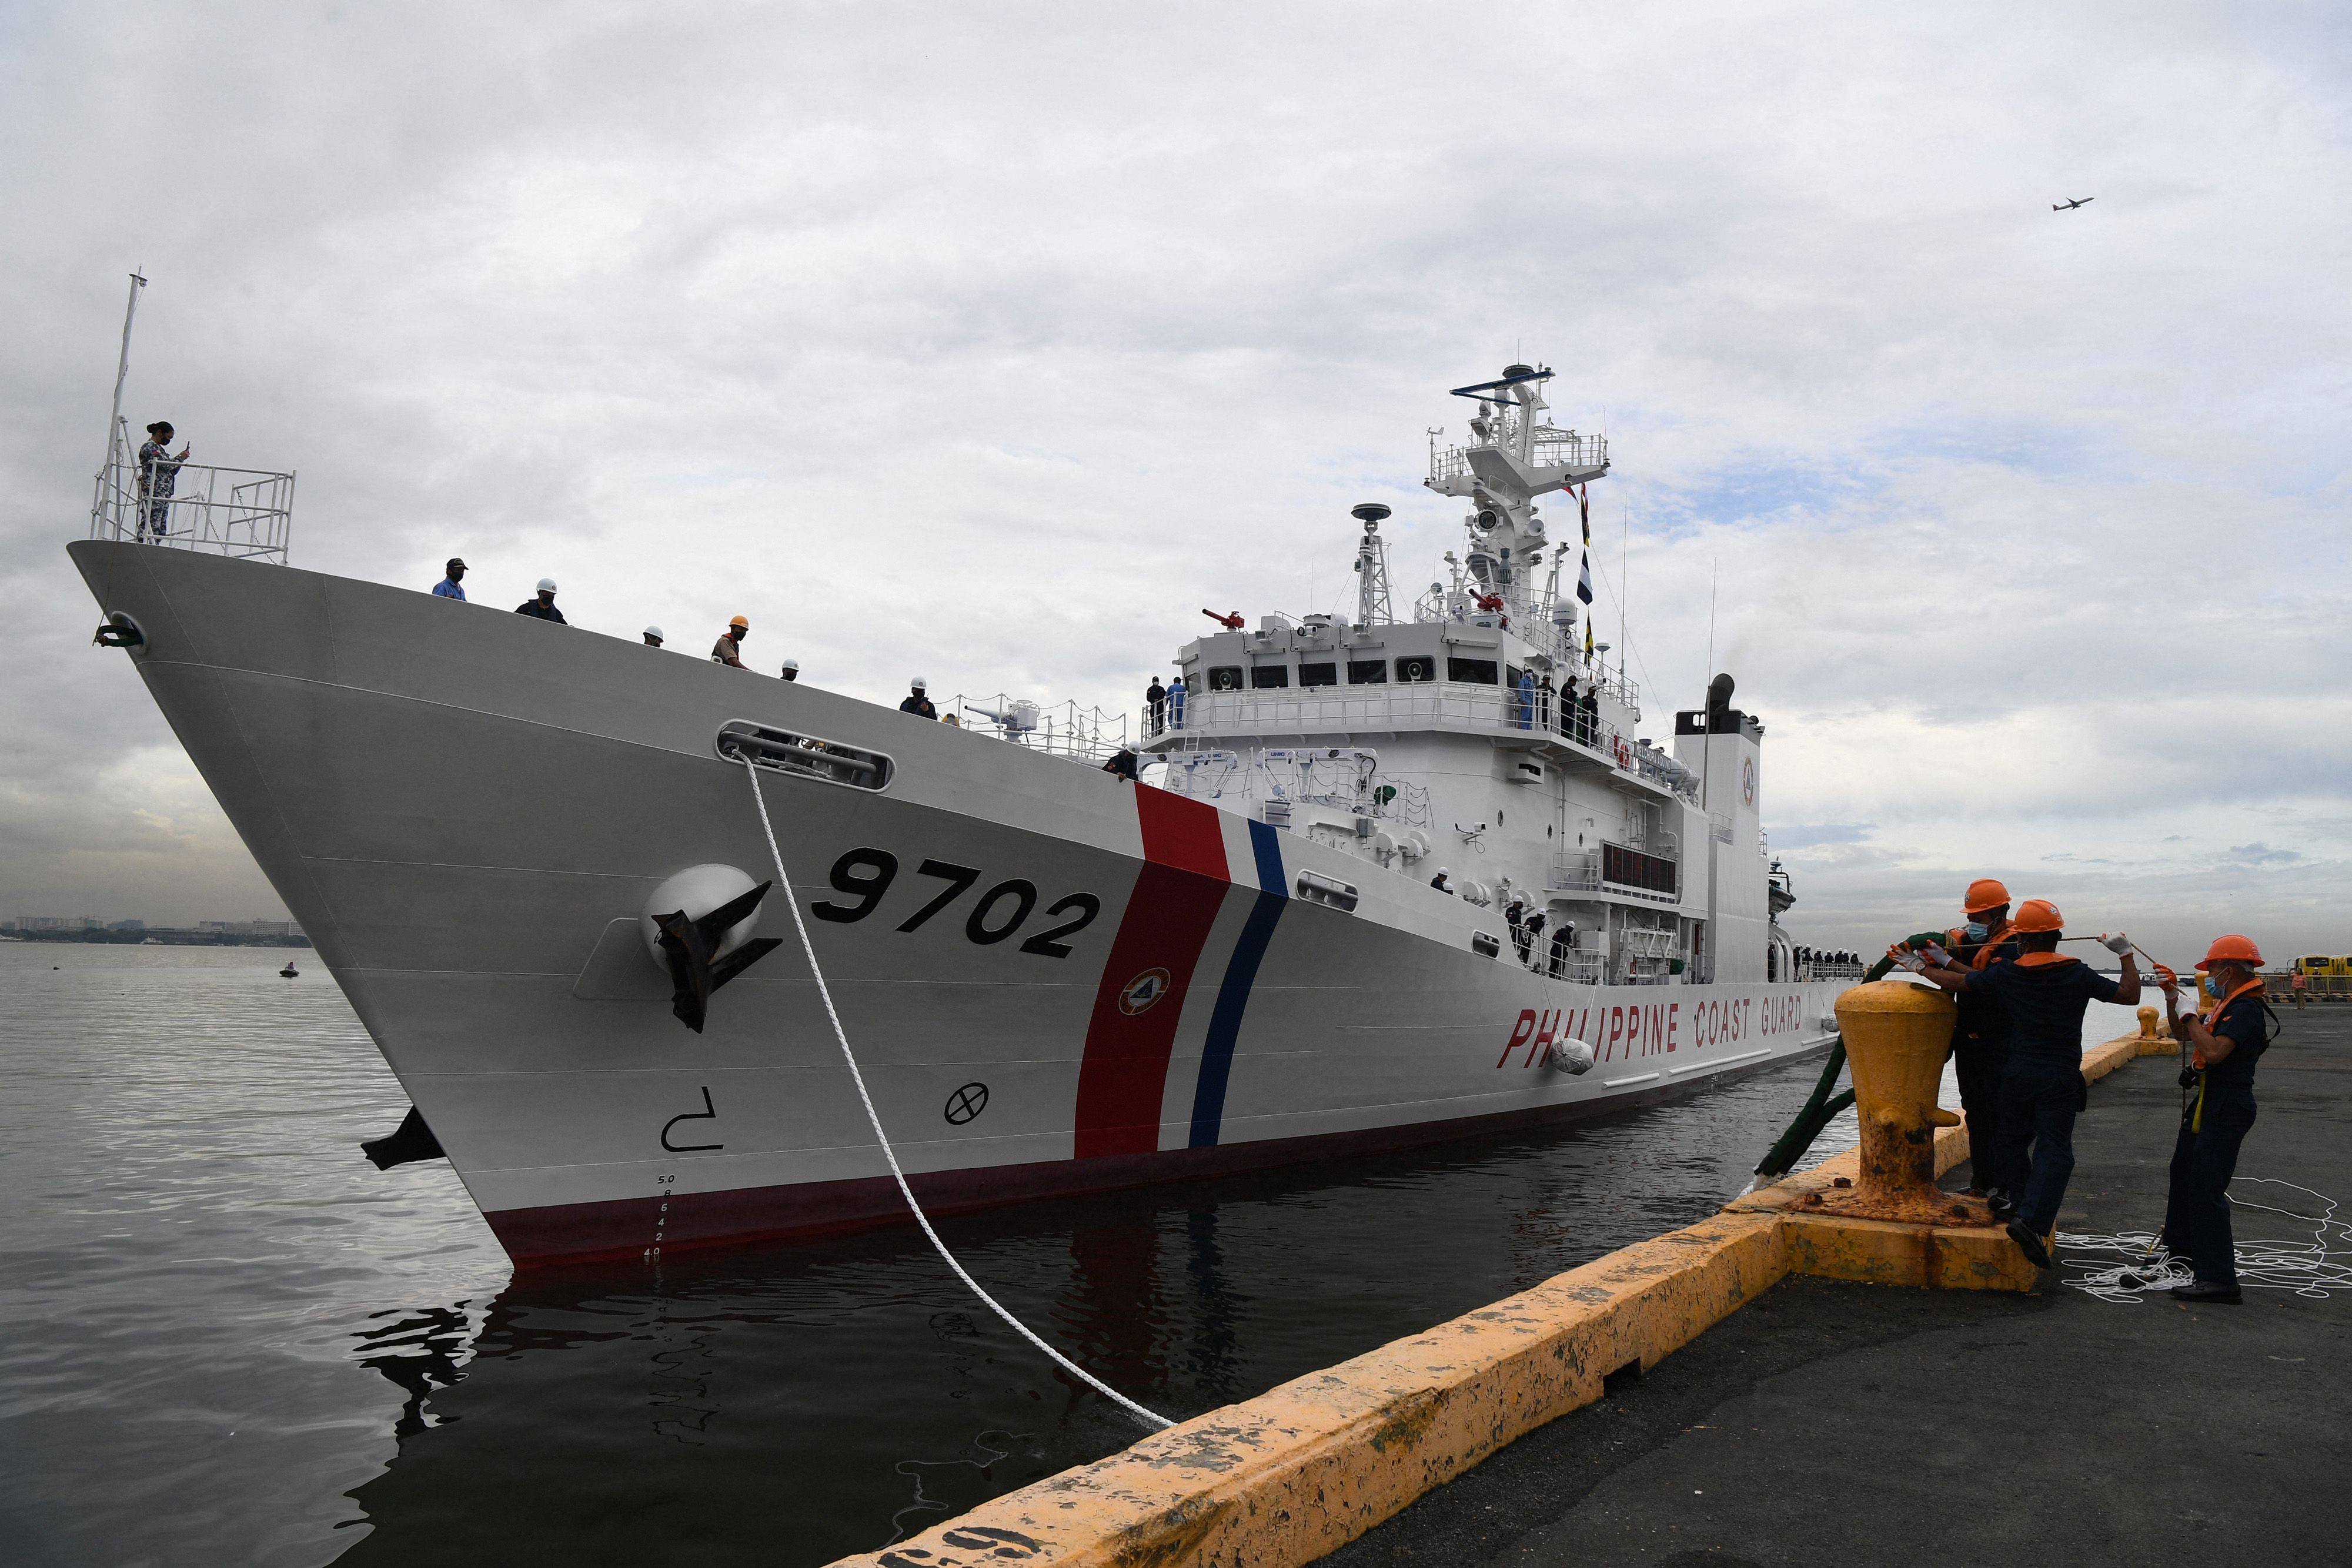  A coastguard vessel the Philippines newly acquired from Japan arrives at dock in Manila in 2022. Photo: AFP